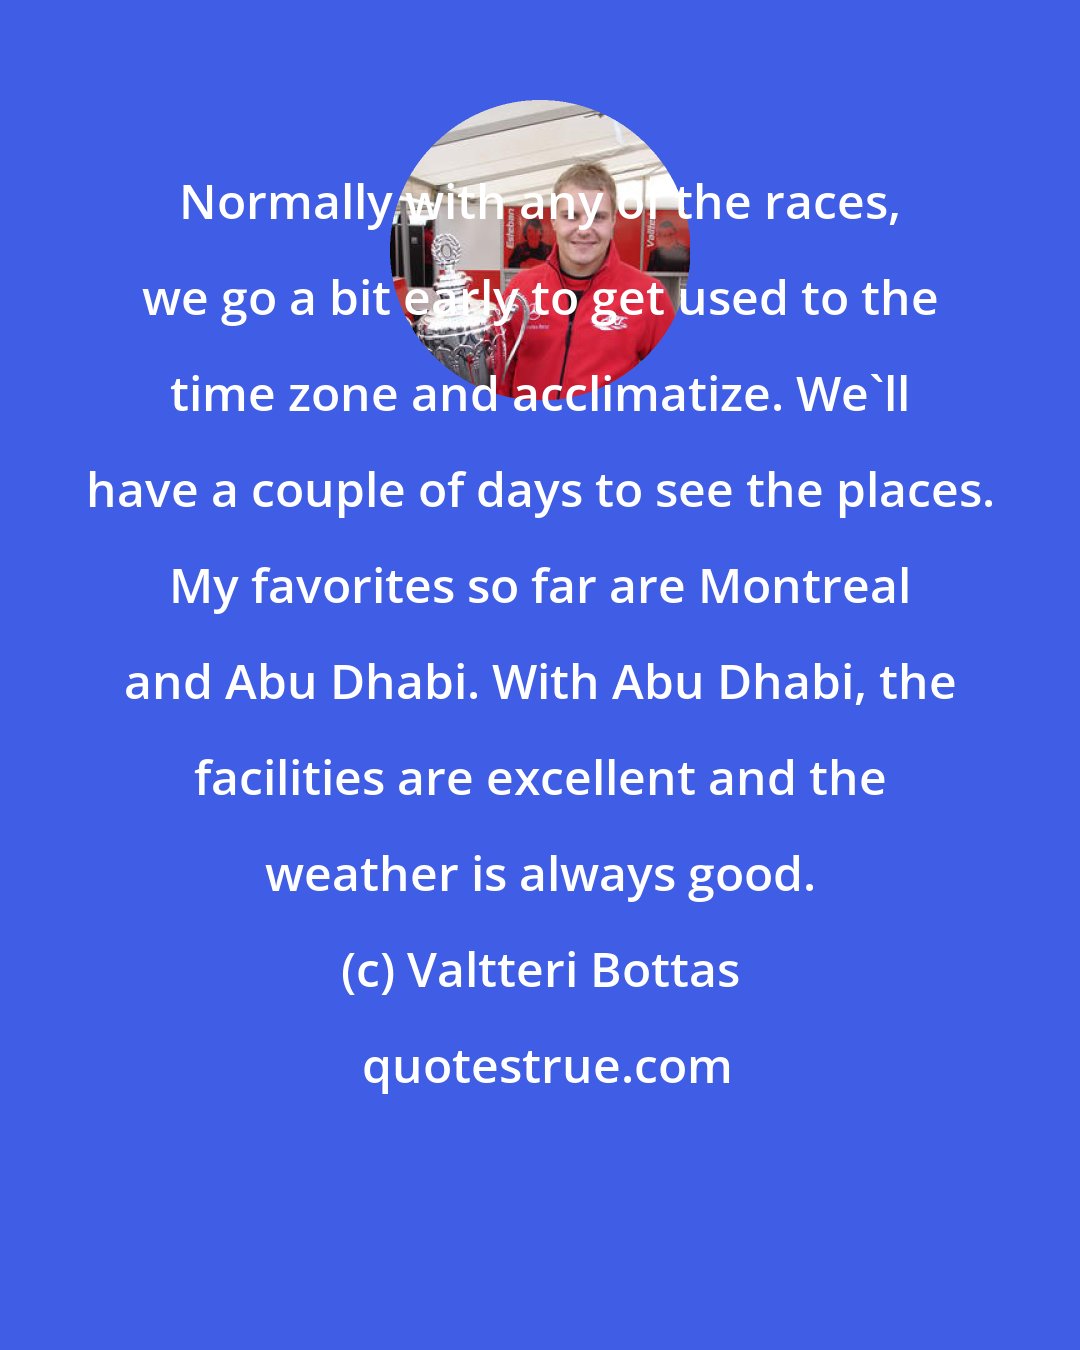 Valtteri Bottas: Normally with any of the races, we go a bit early to get used to the time zone and acclimatize. We'll have a couple of days to see the places. My favorites so far are Montreal and Abu Dhabi. With Abu Dhabi, the facilities are excellent and the weather is always good.